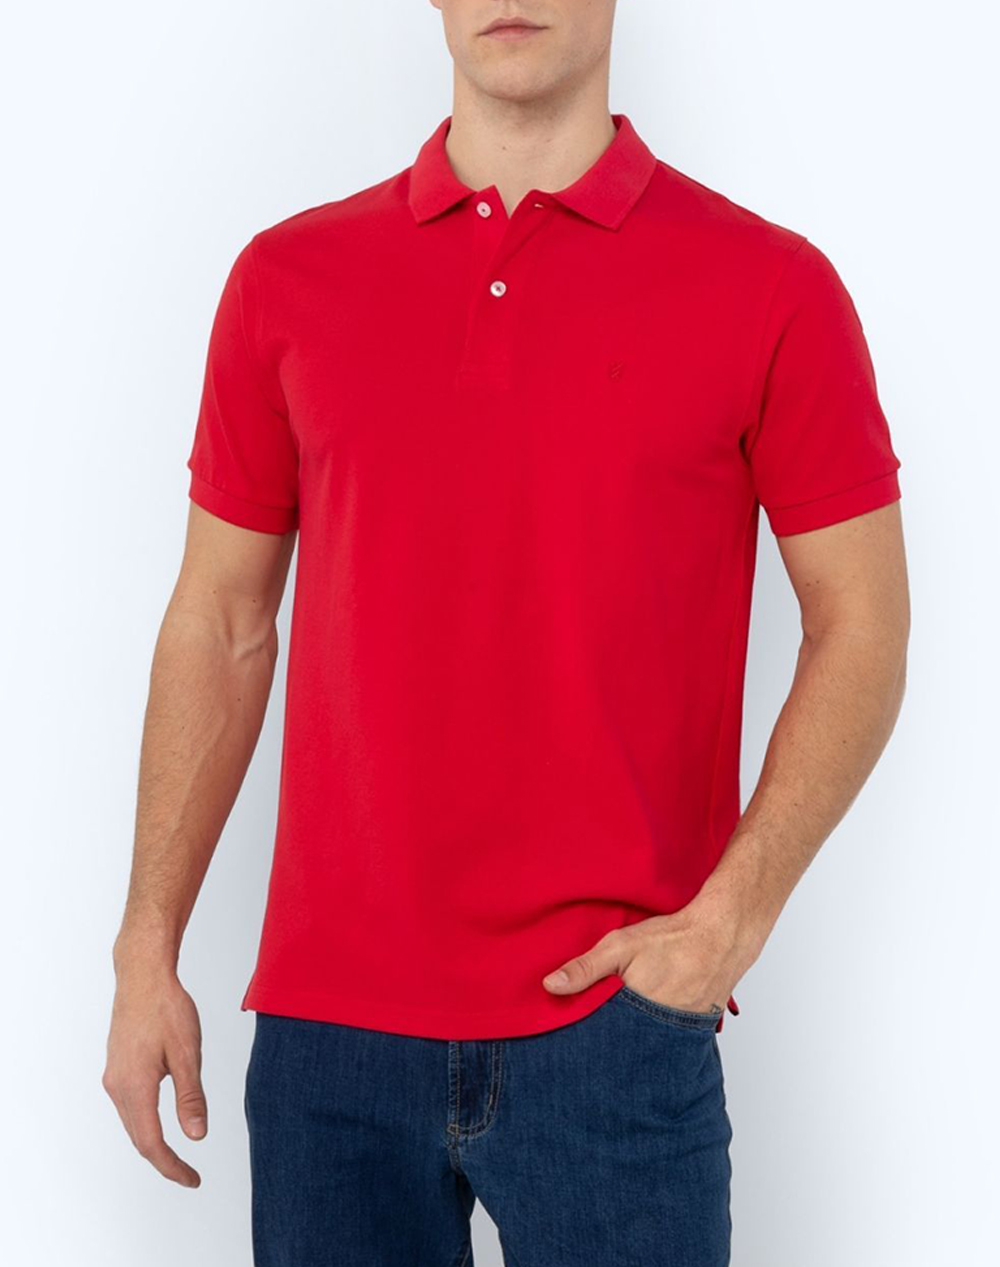 THE BOSTONIANS ΜΠΛΟΥΖΑ POLO PIQUE REGULAR FIT 3PS0001-LIGHT Red